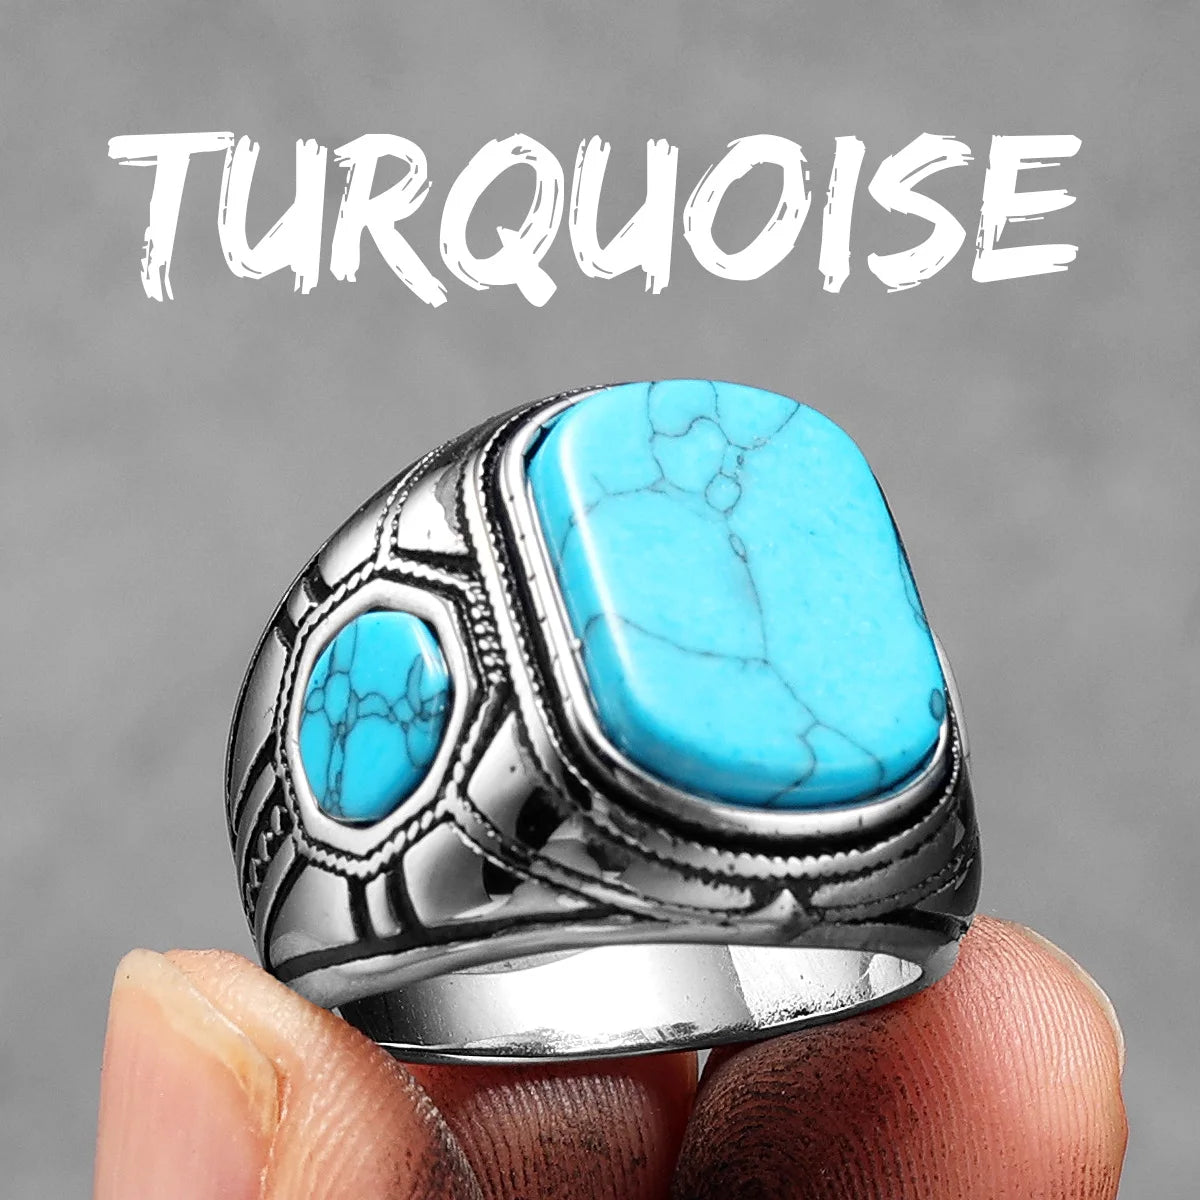 Turquoise Carved Men Rings Stainless Steel Vintage LookR1215-Turquoise7